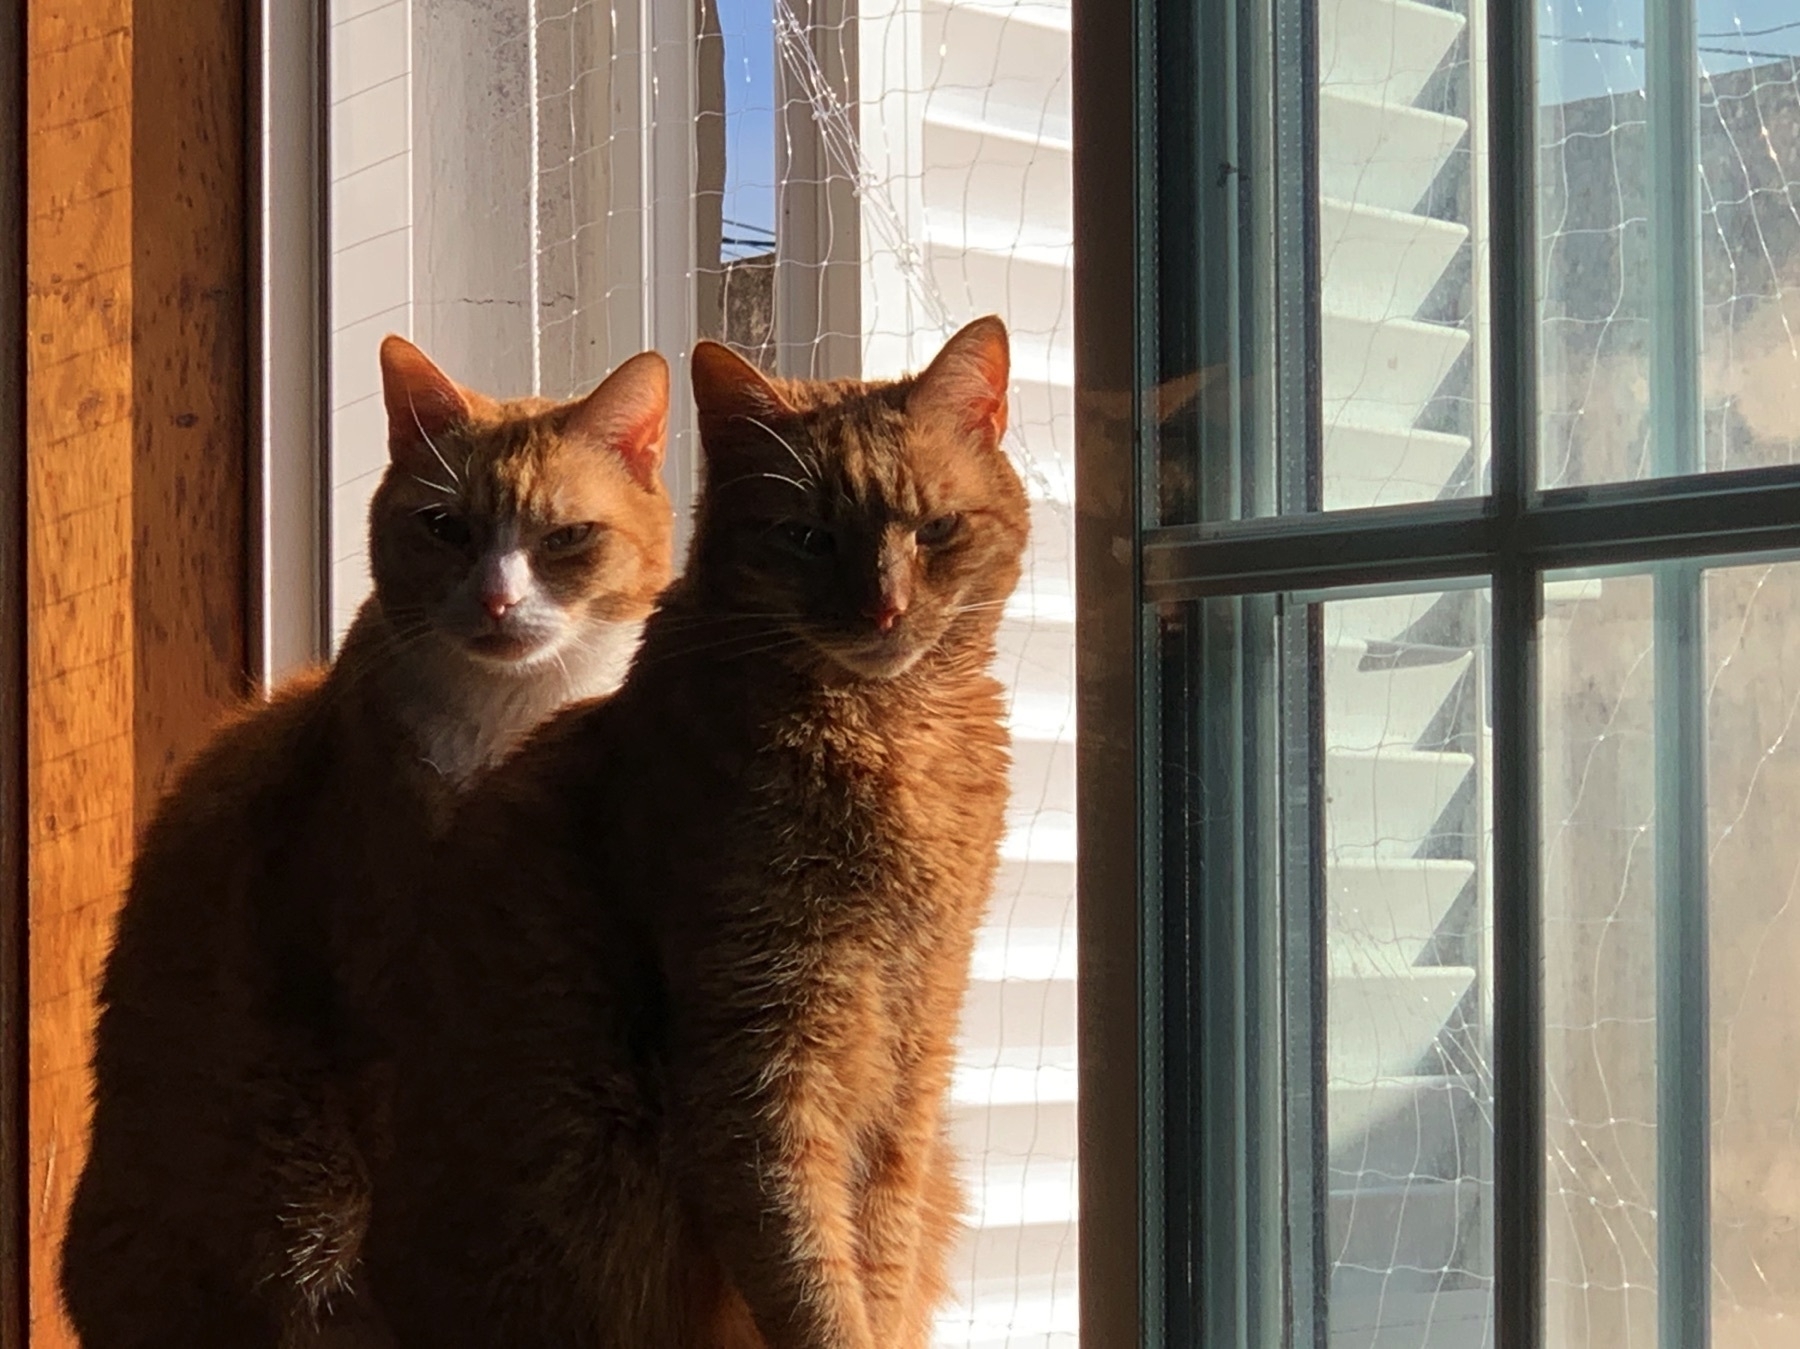 Merry and Pippin, two ginger cats, sitting on a sunny windowsill, looking back at the camera